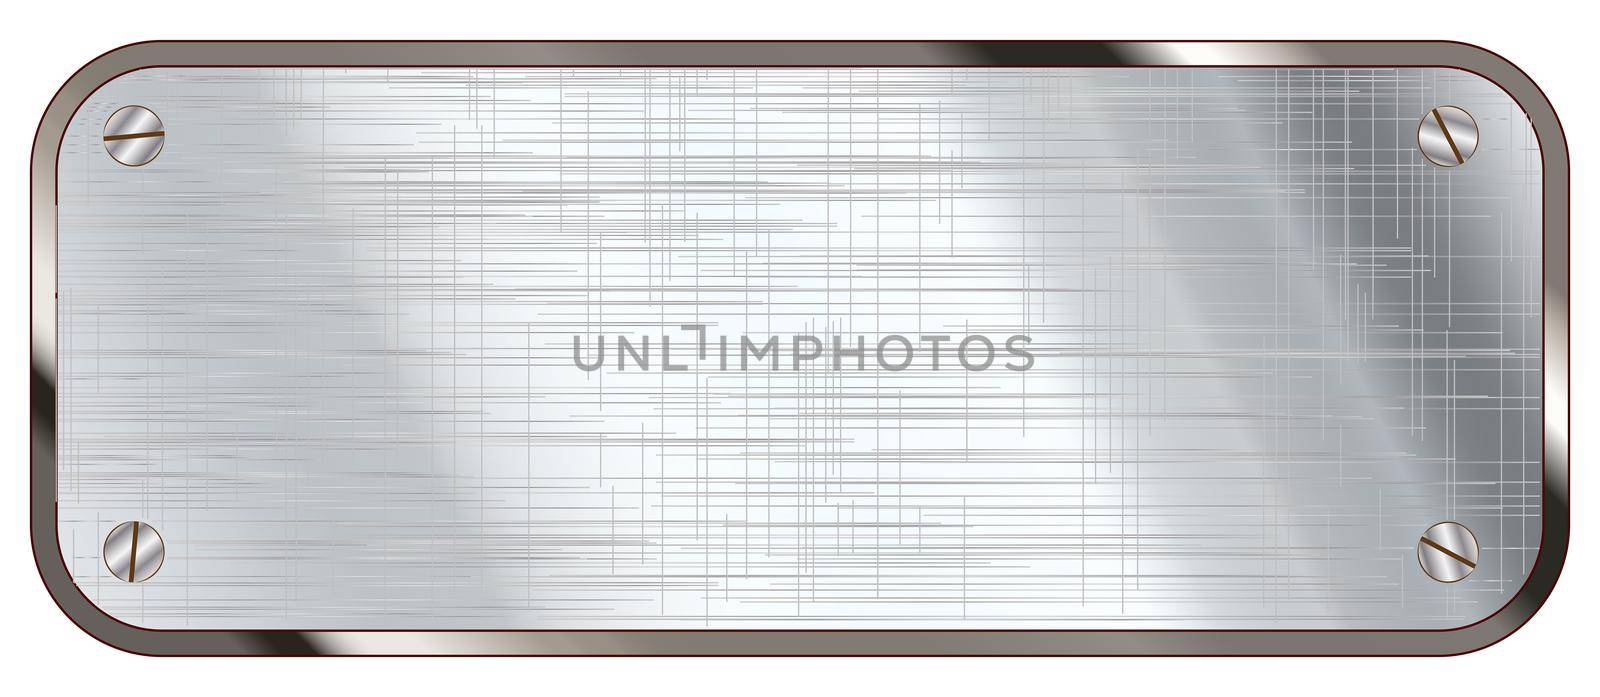 A metal plaque with no text as a background